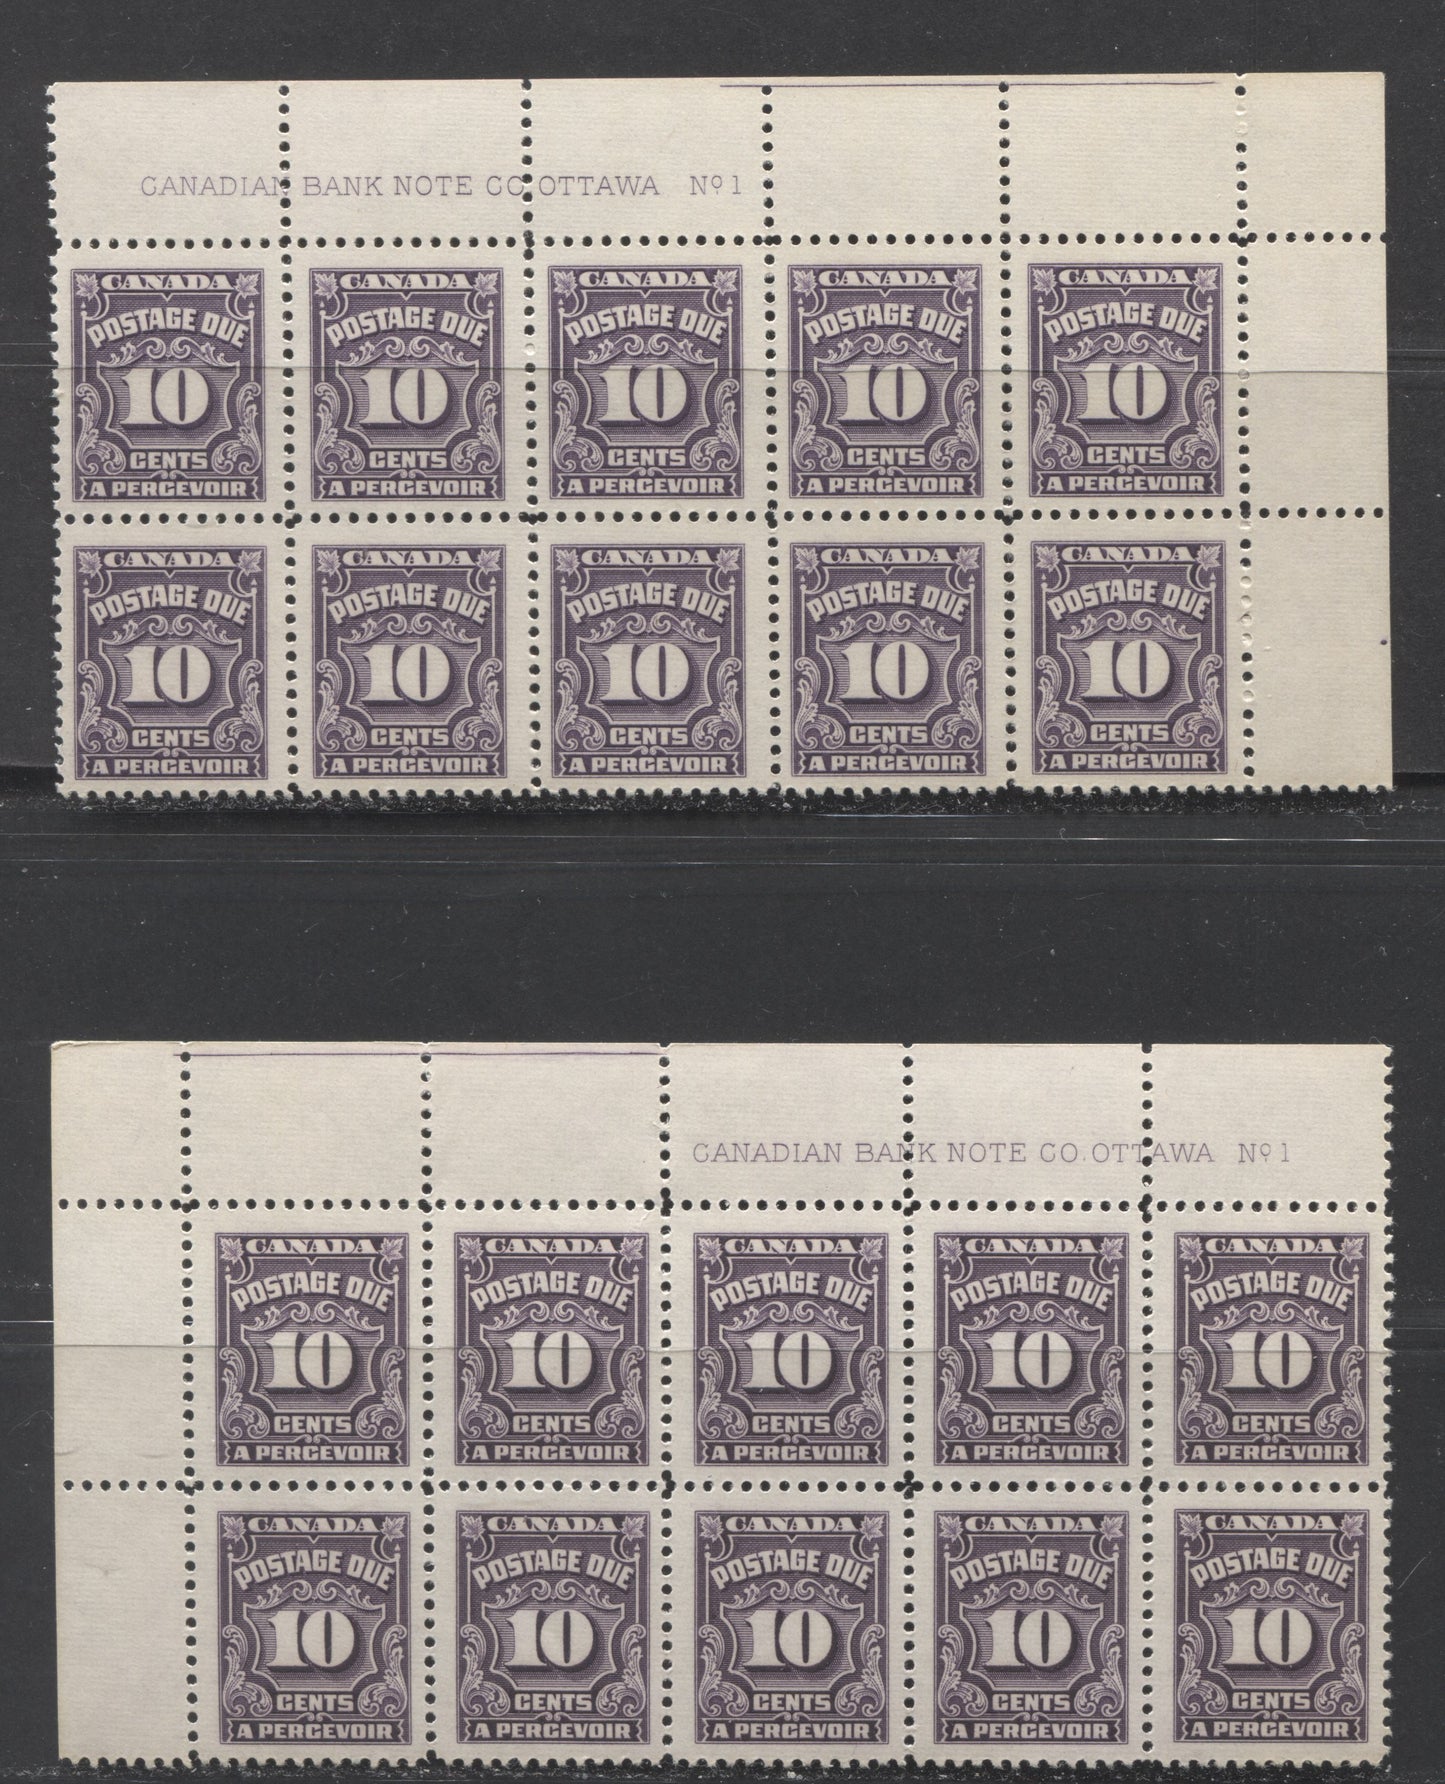 Lot 90 Canada #J20 10c Violet & Deep Rose Lilac, 1935-1965 Fourth Postage Due Issue, 2 FNH UR & UL Plate 1 Blocks Of 10 On Ribbed Papers With Cream Gum